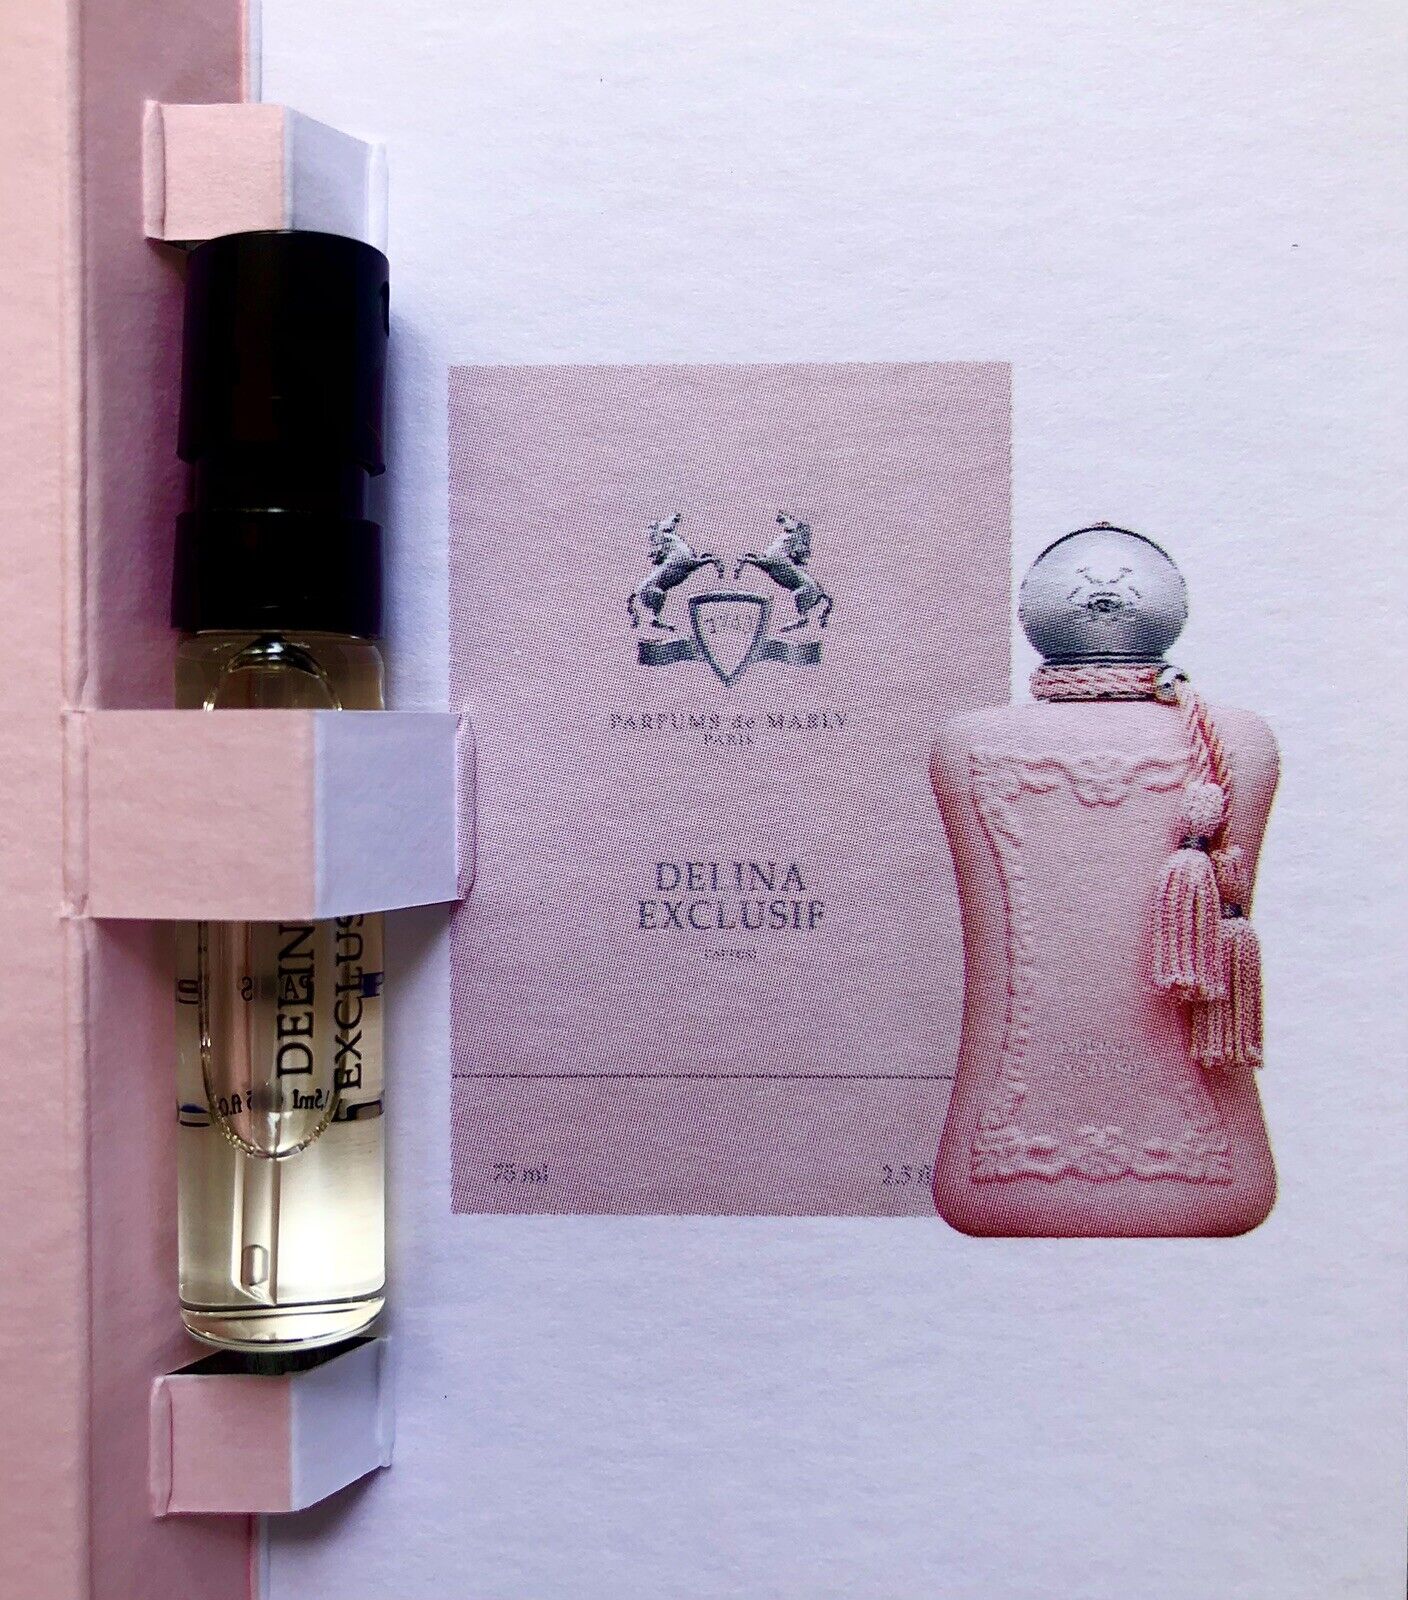 Delina Exclusif by Parfums De Marly 1.5ml Vial Spray New Factory Sealed